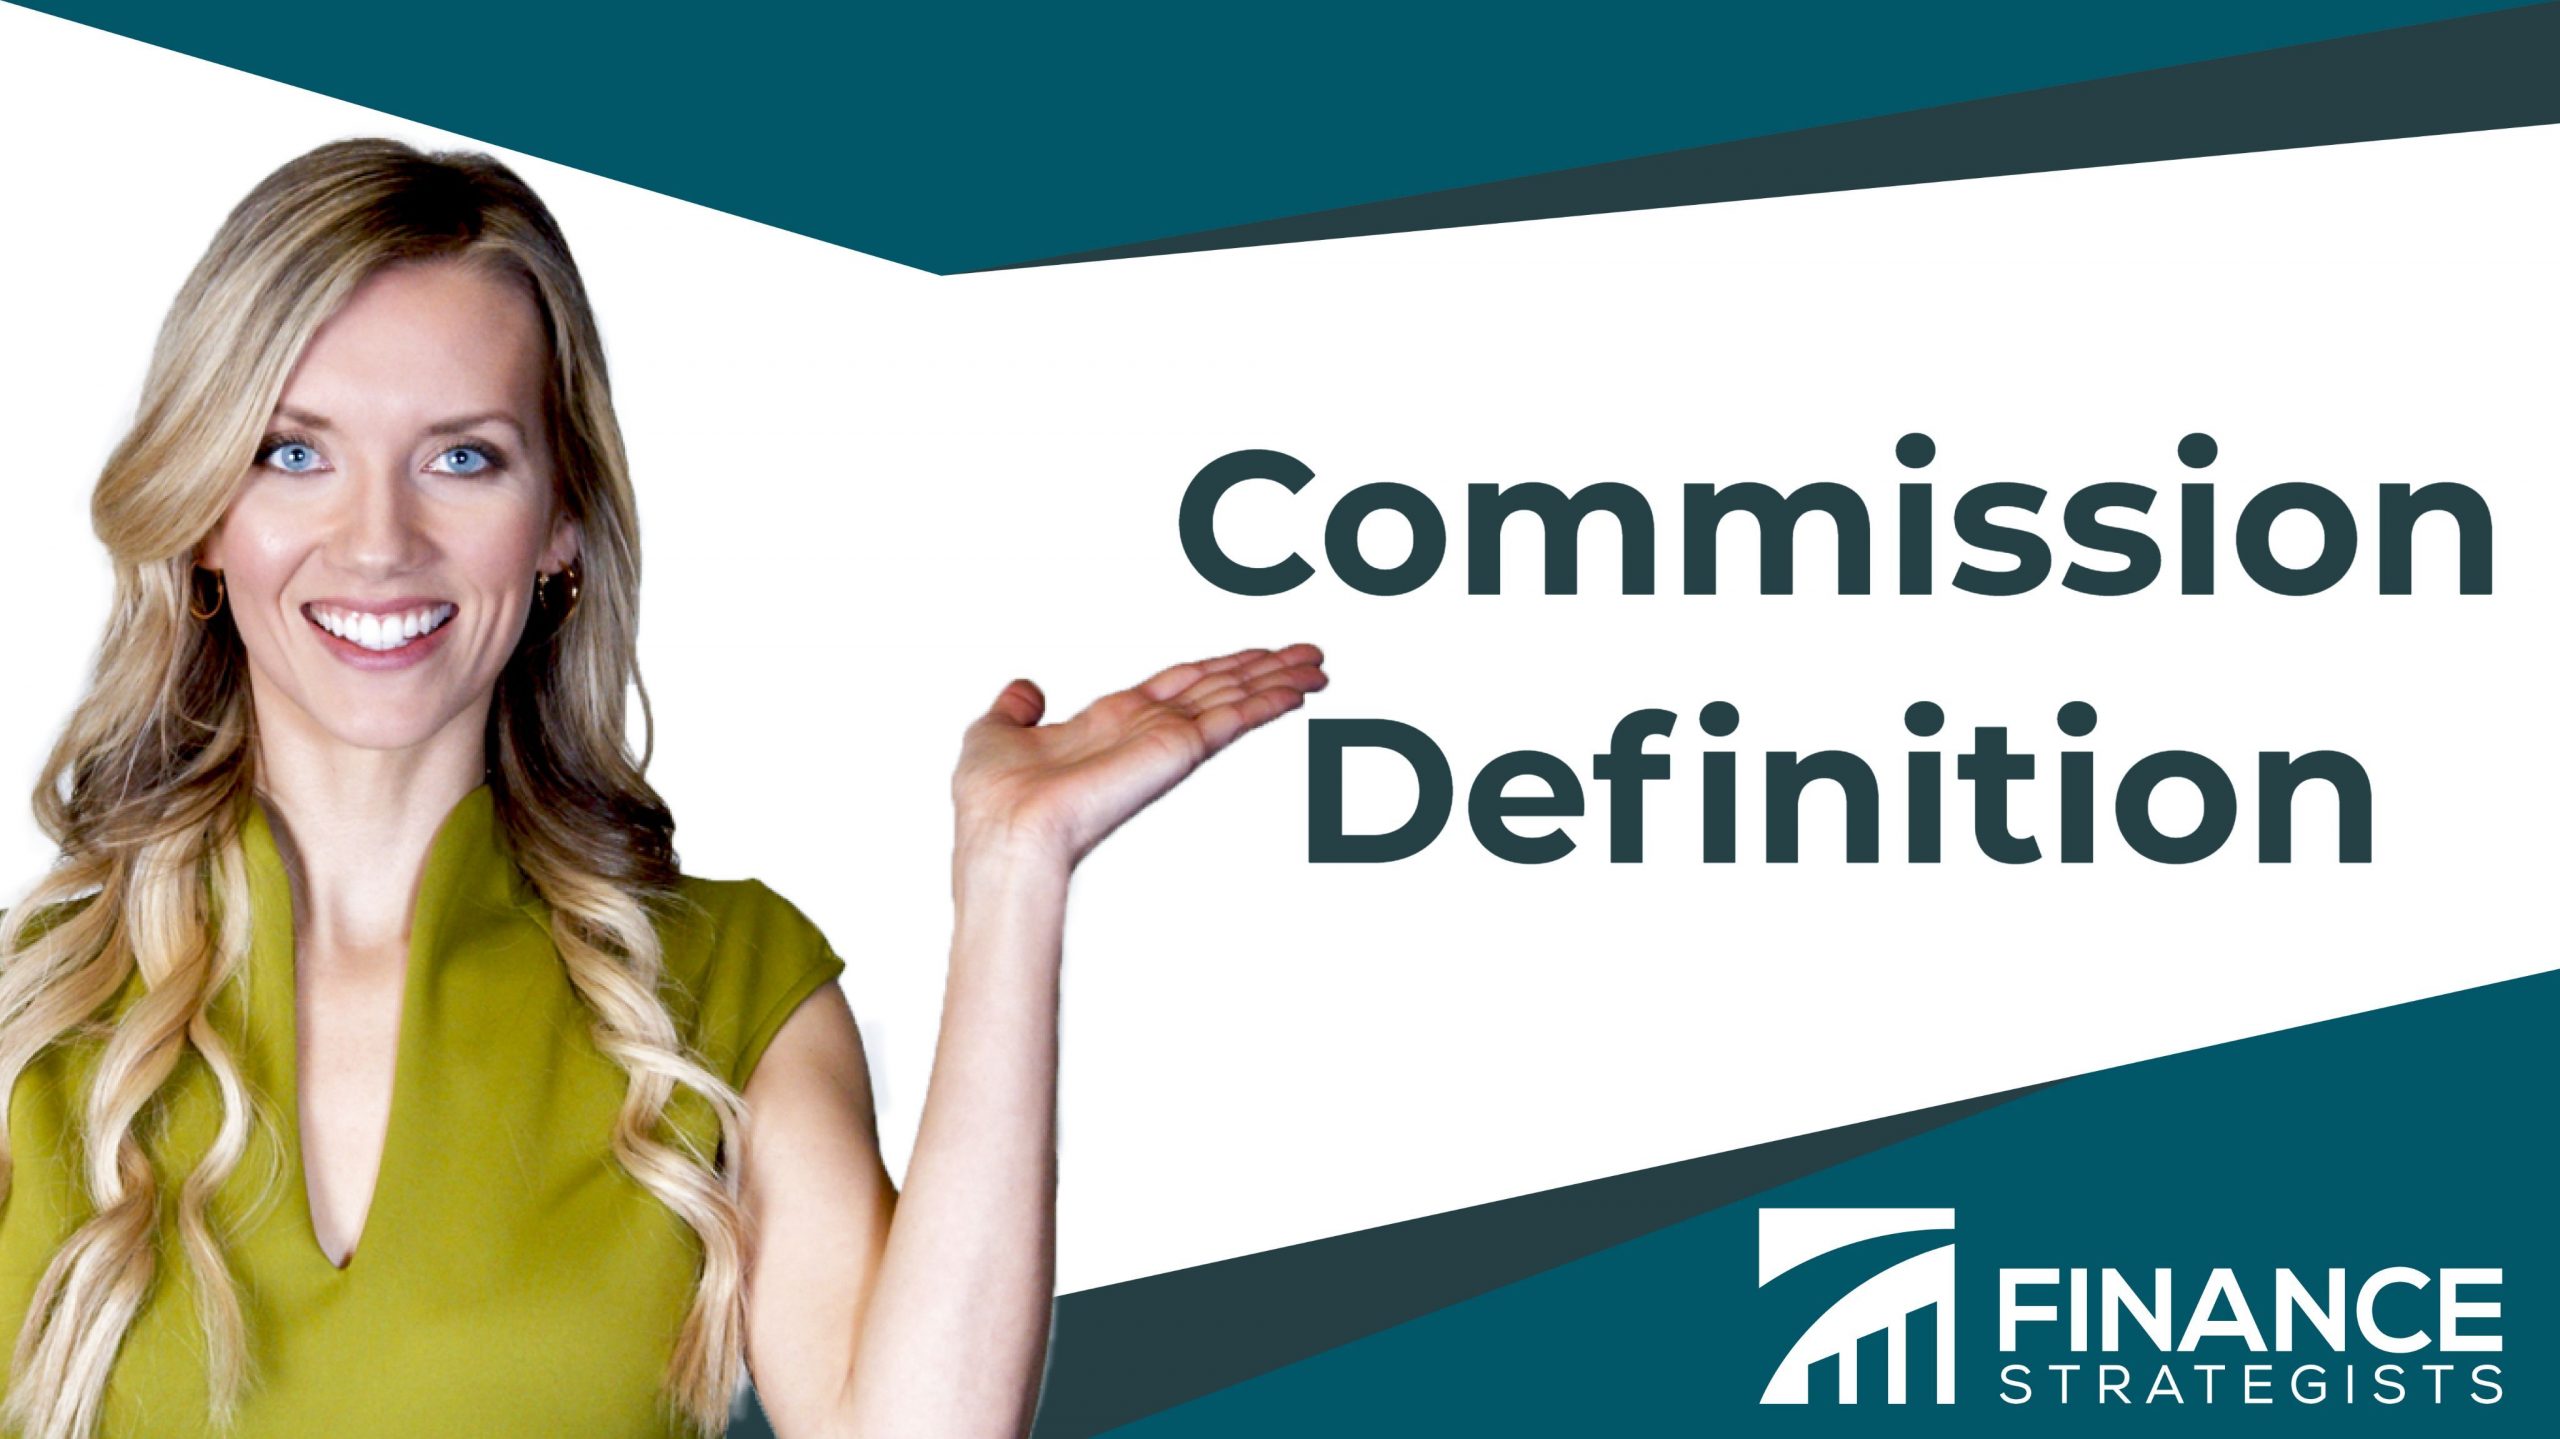 Rebate Commission Definition